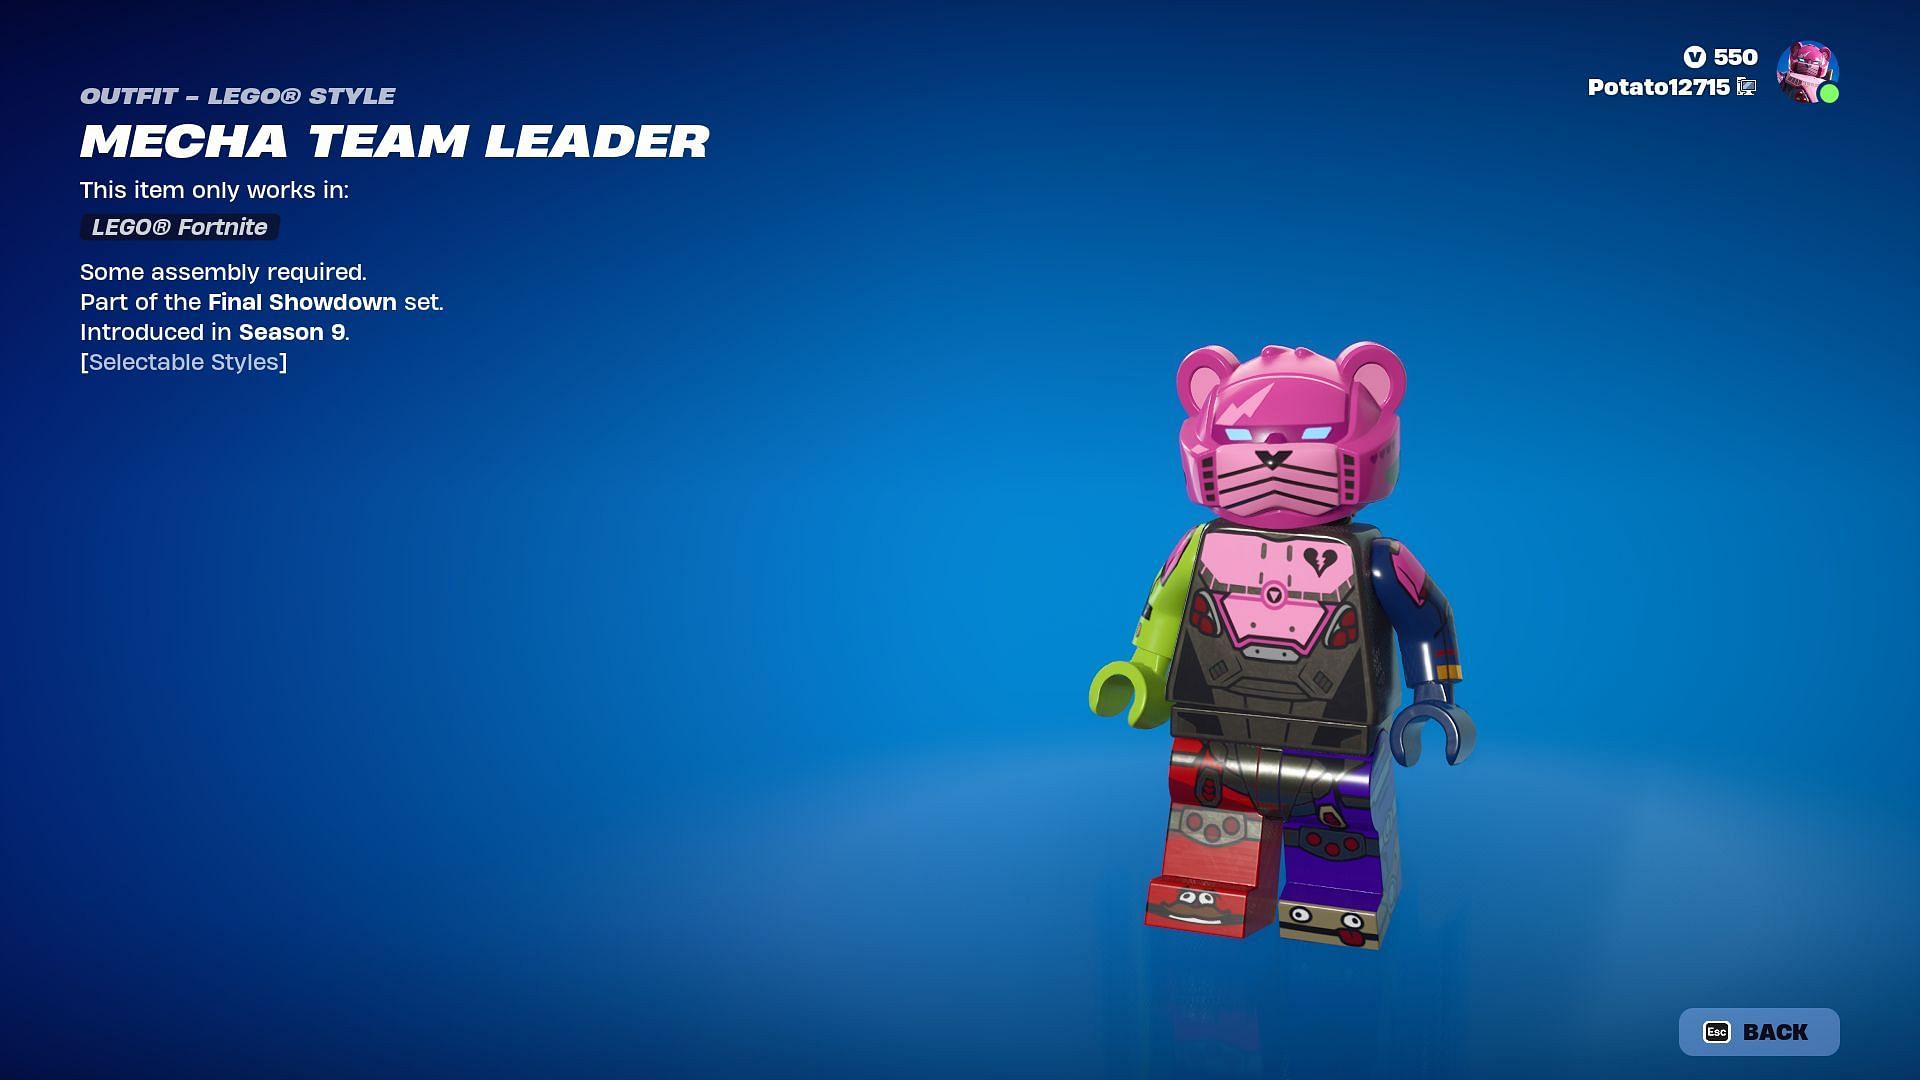 Mecha Team Leader skin in Fortnite cannot be purchased separately (Image via Epic Games)